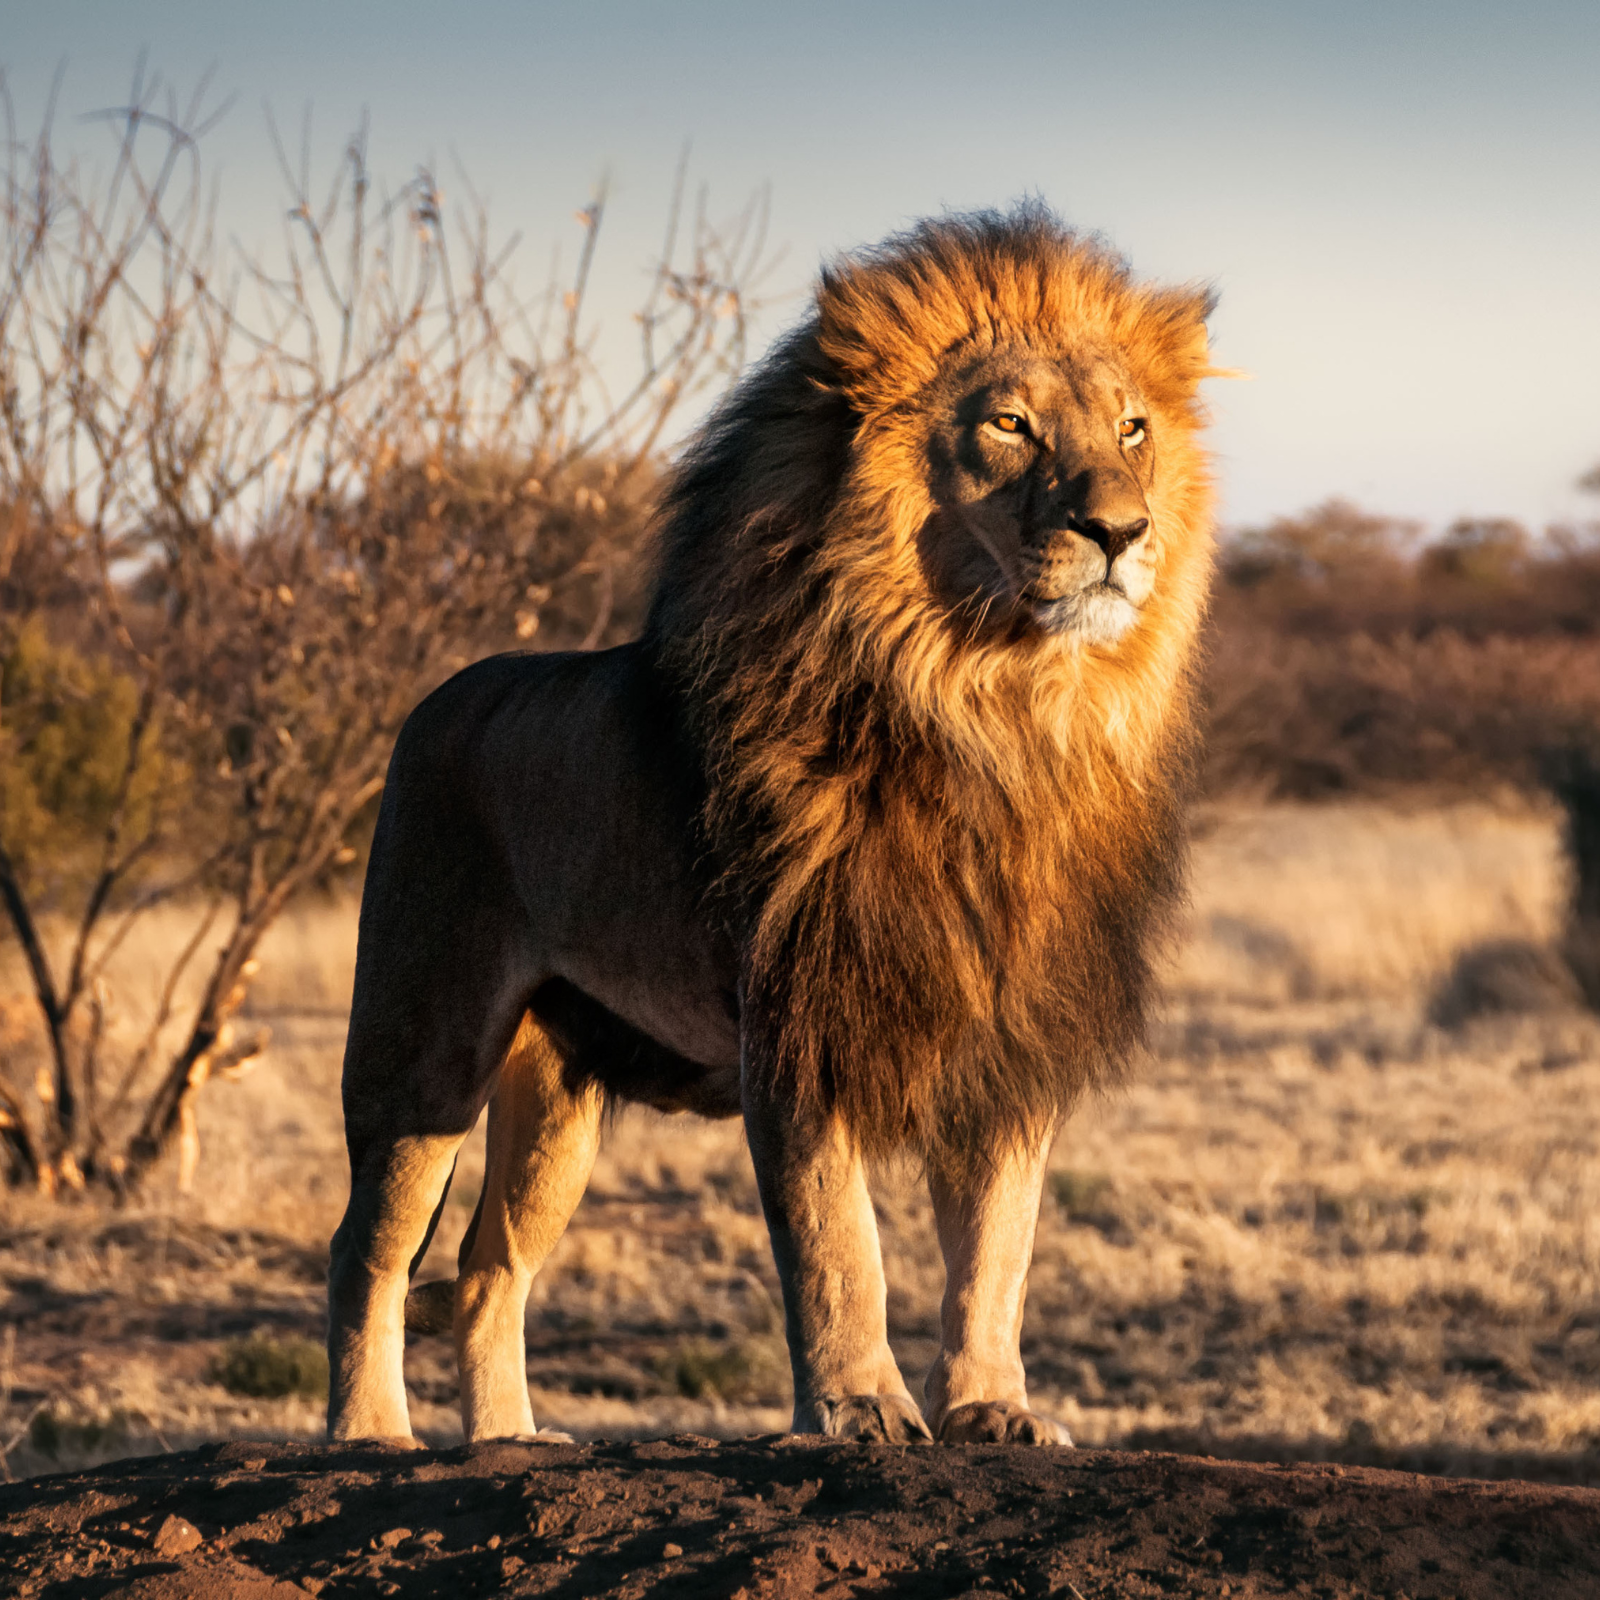 World Lion Day 2022: Date, History and Significance of 'King of the Jungle'